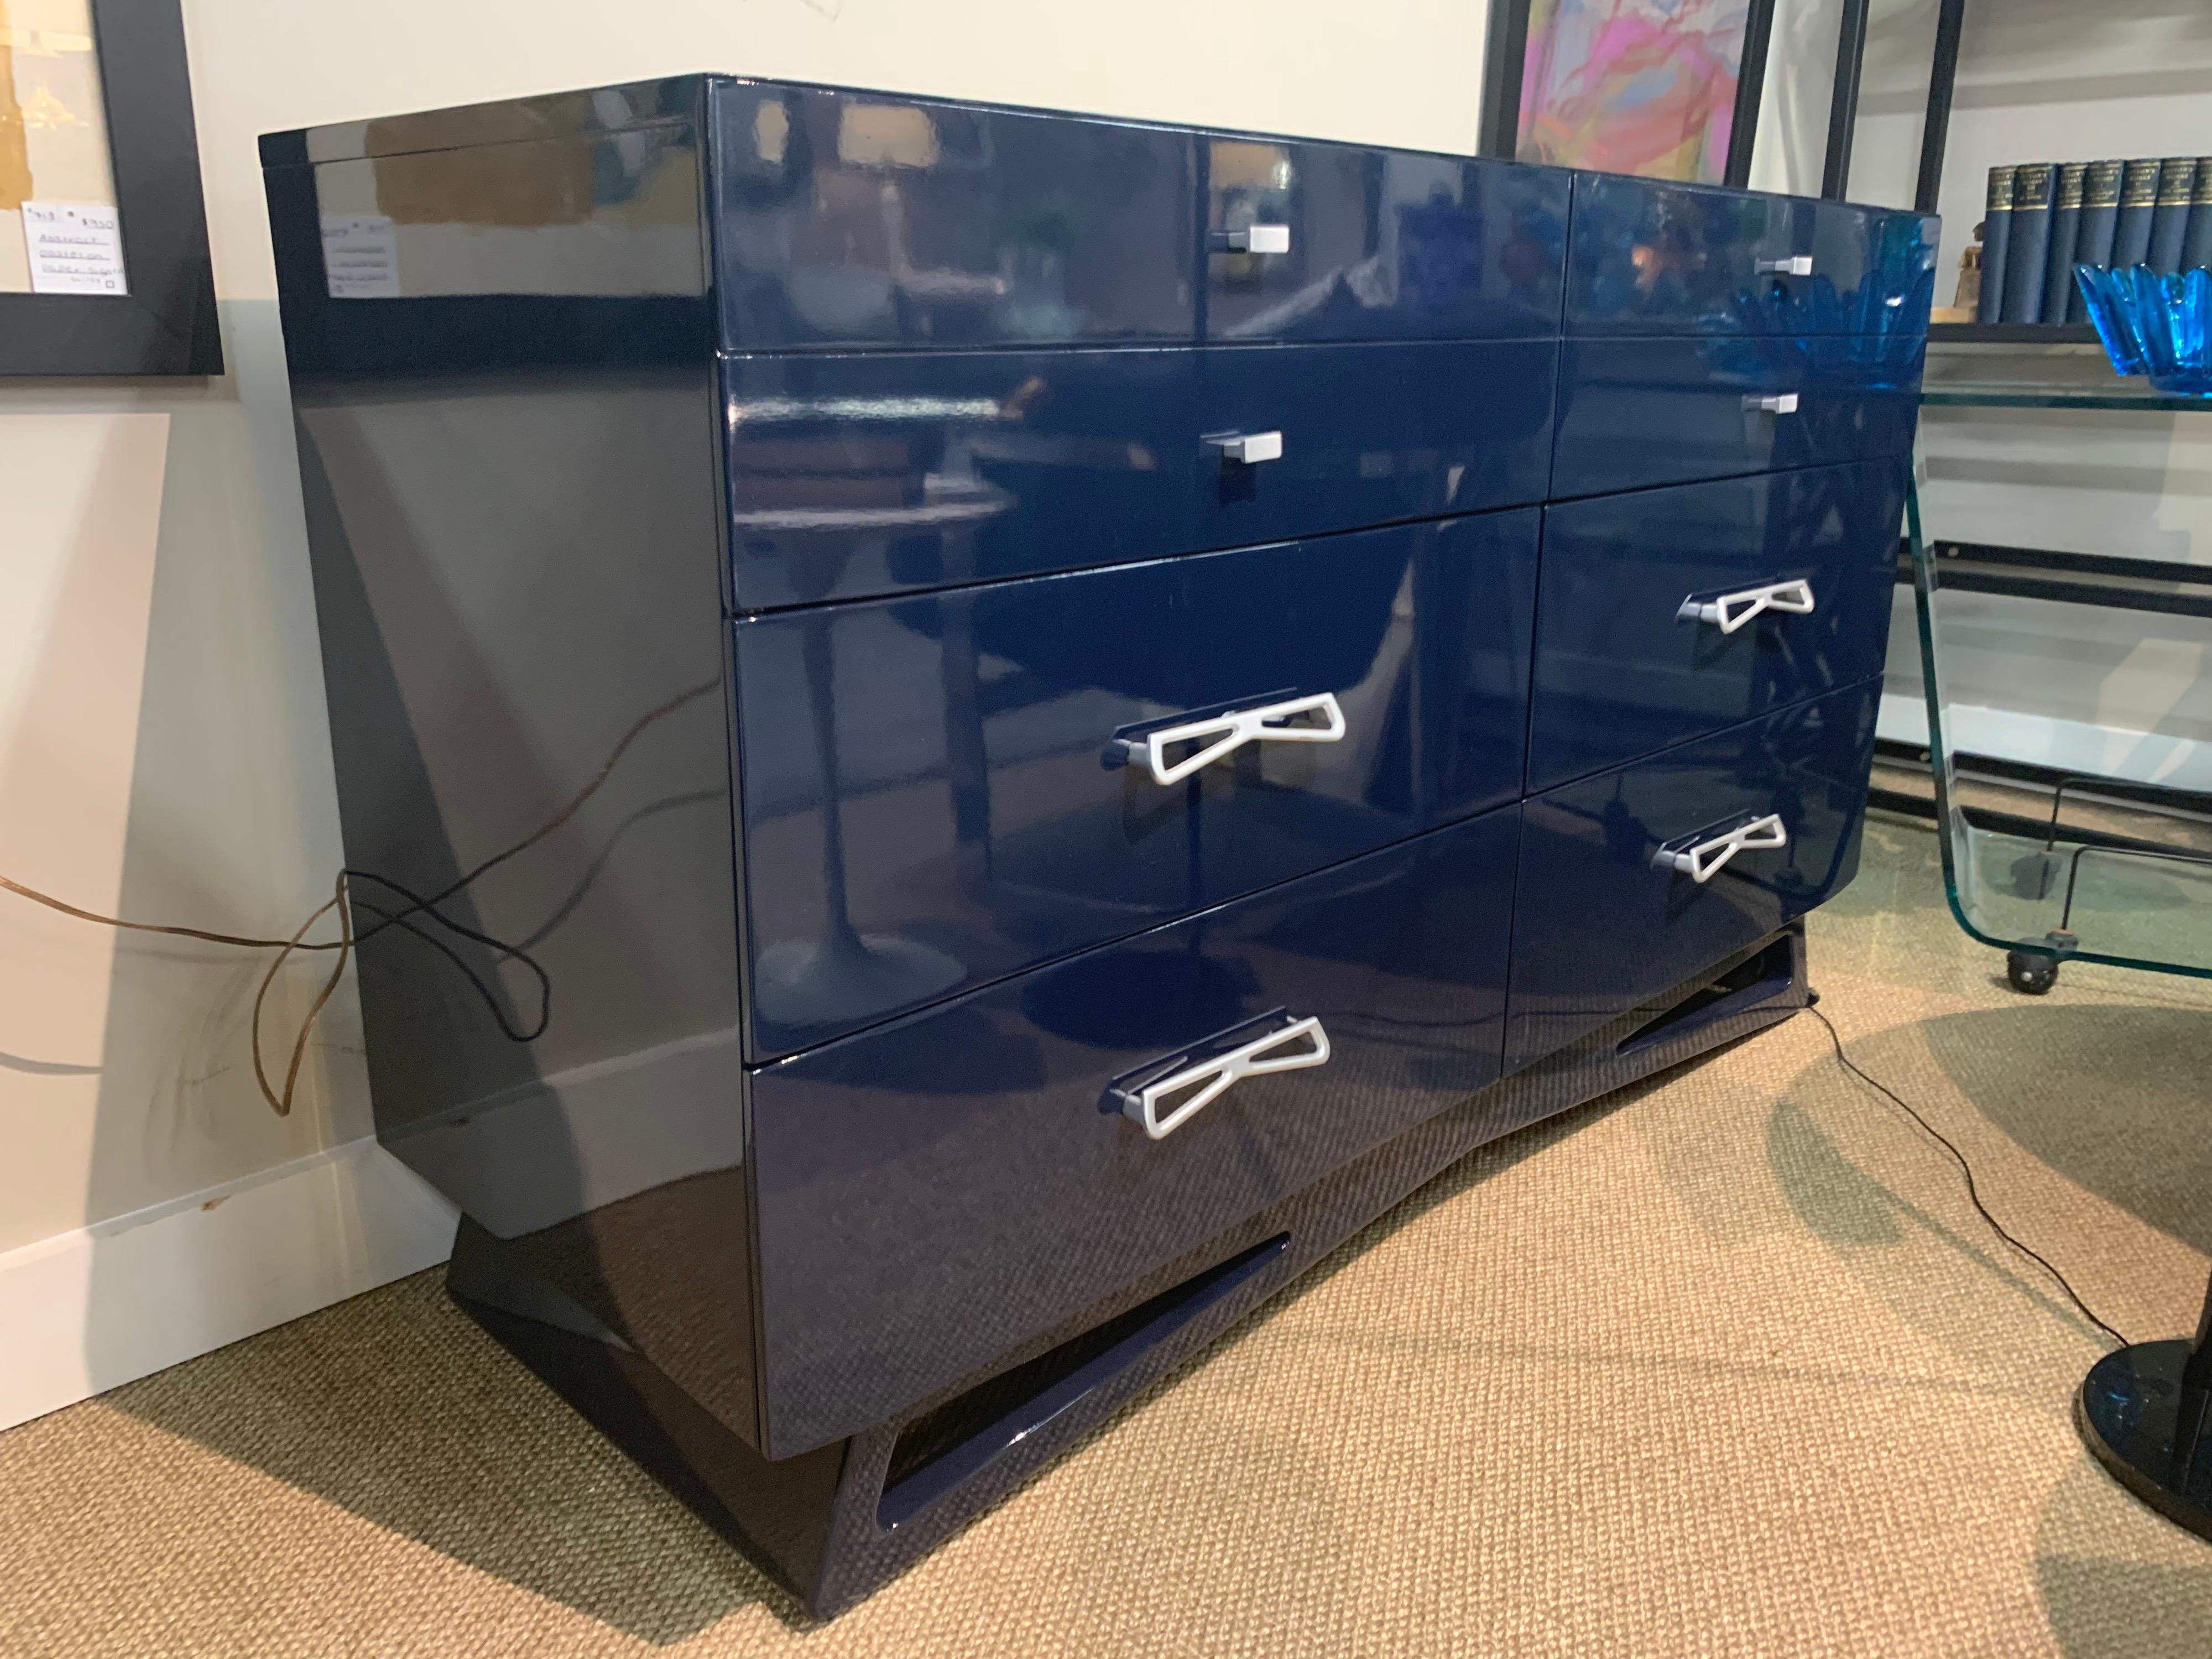 Recently lacquered in a gorgeous navy blue. All original hardware which is space age at its best. Floating base is a showstopper!